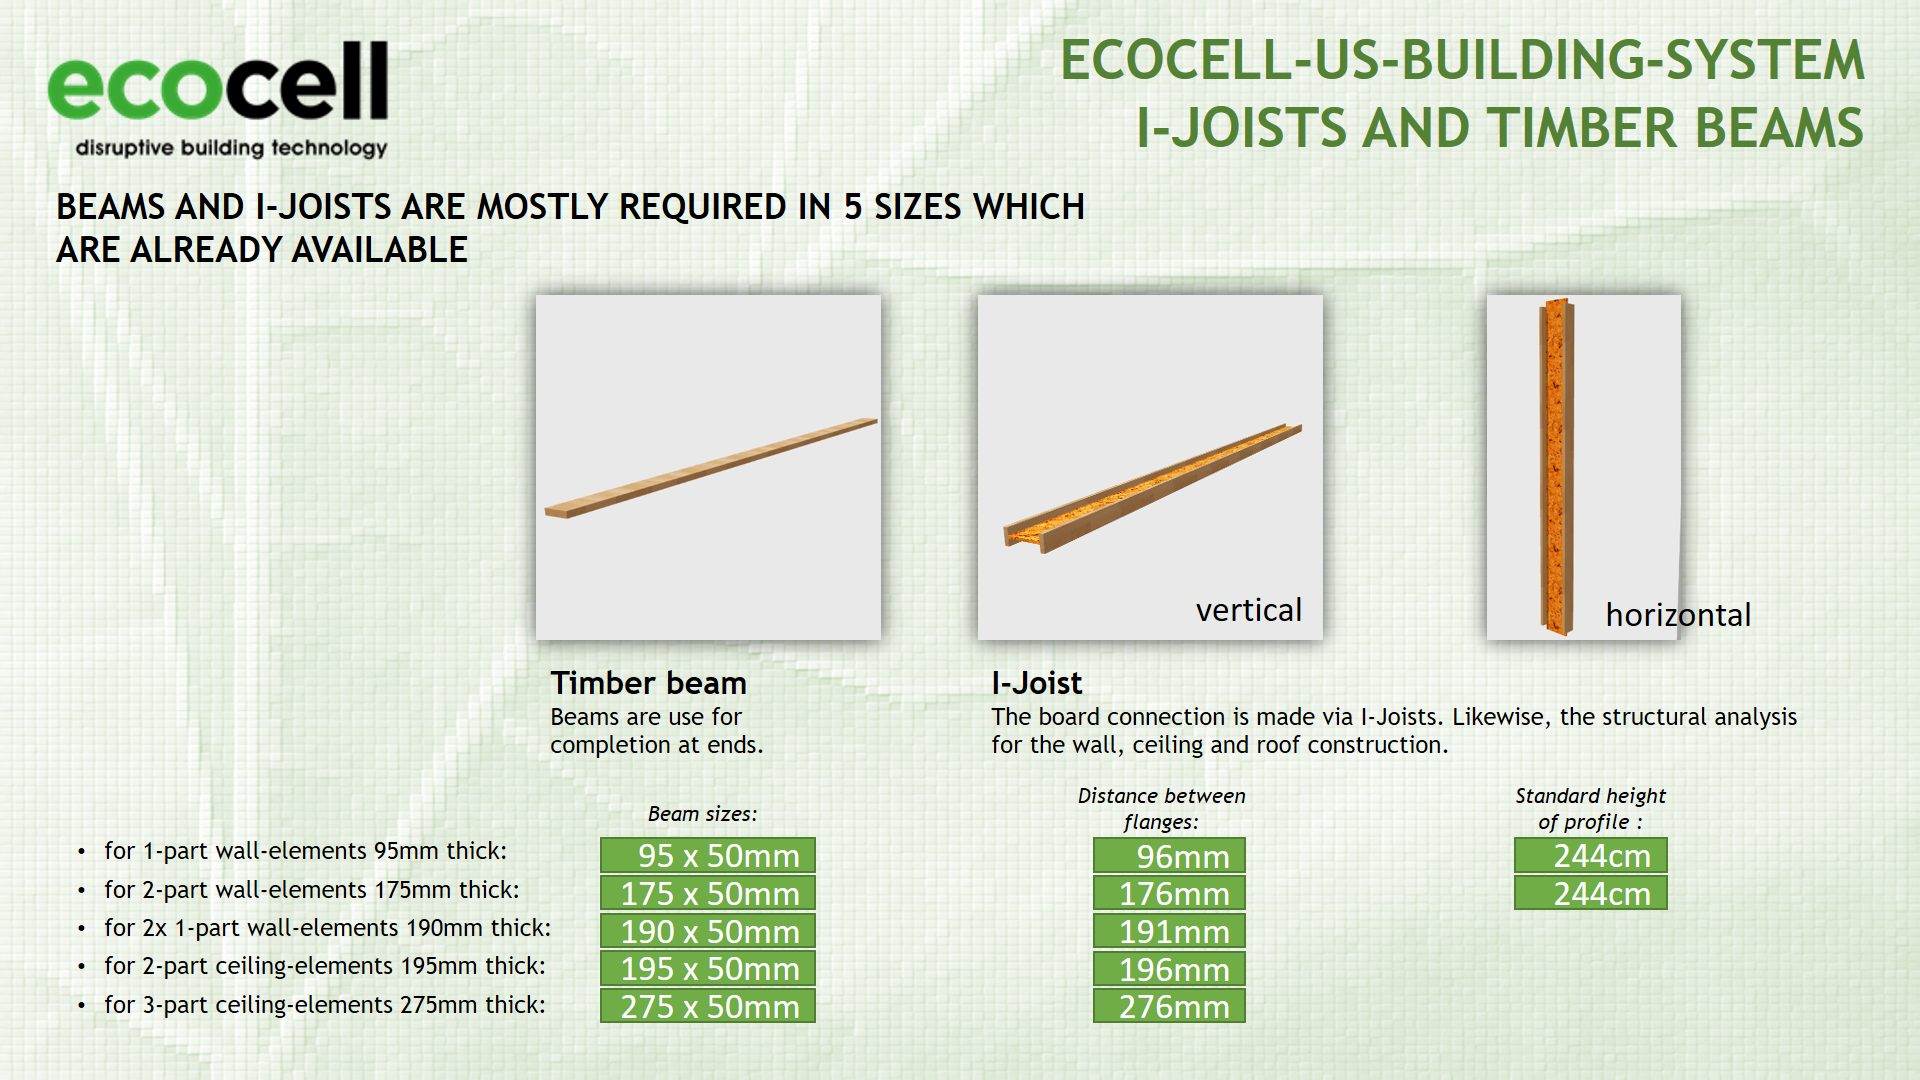 ECOCELL® batts, ECOCELL by Cellulose Material Solutions, LLC